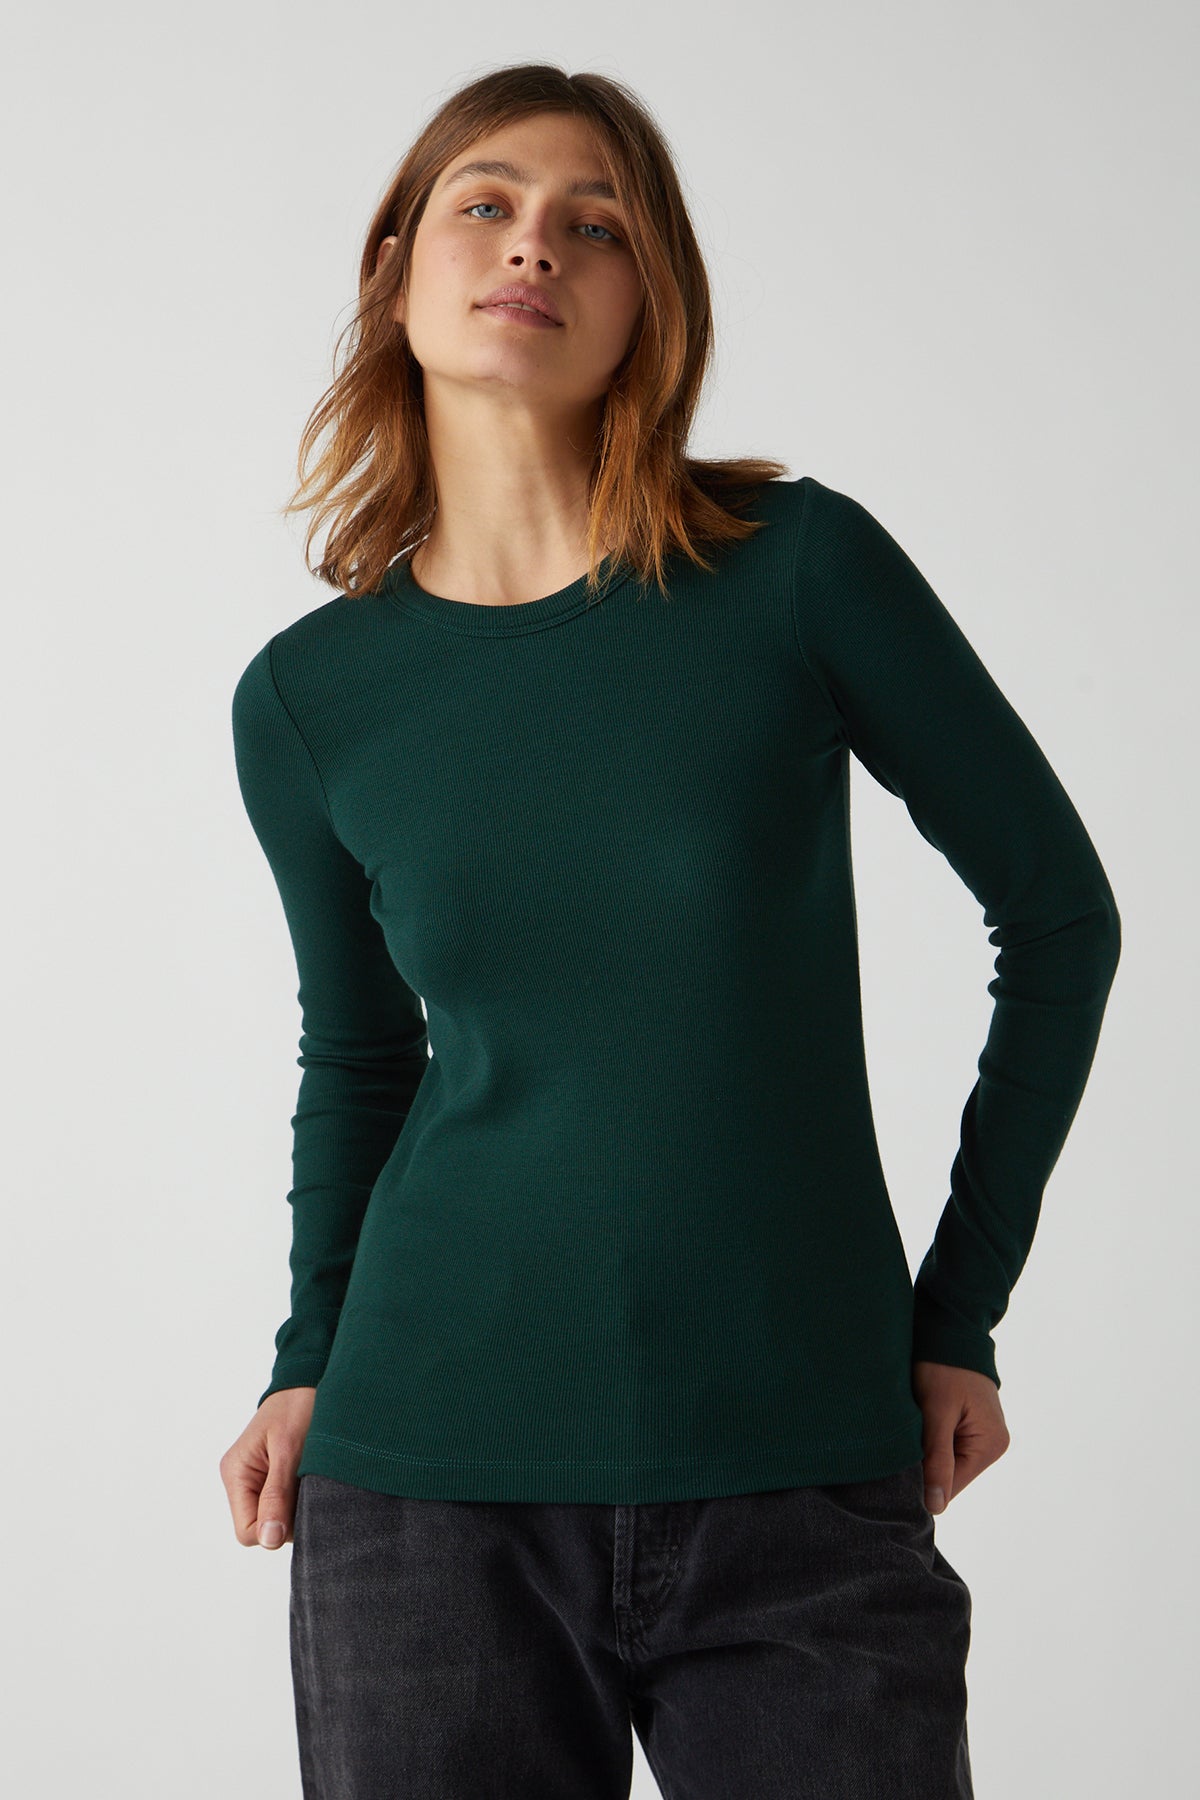 Camino Tee in forest green with black denim front-25483428659393